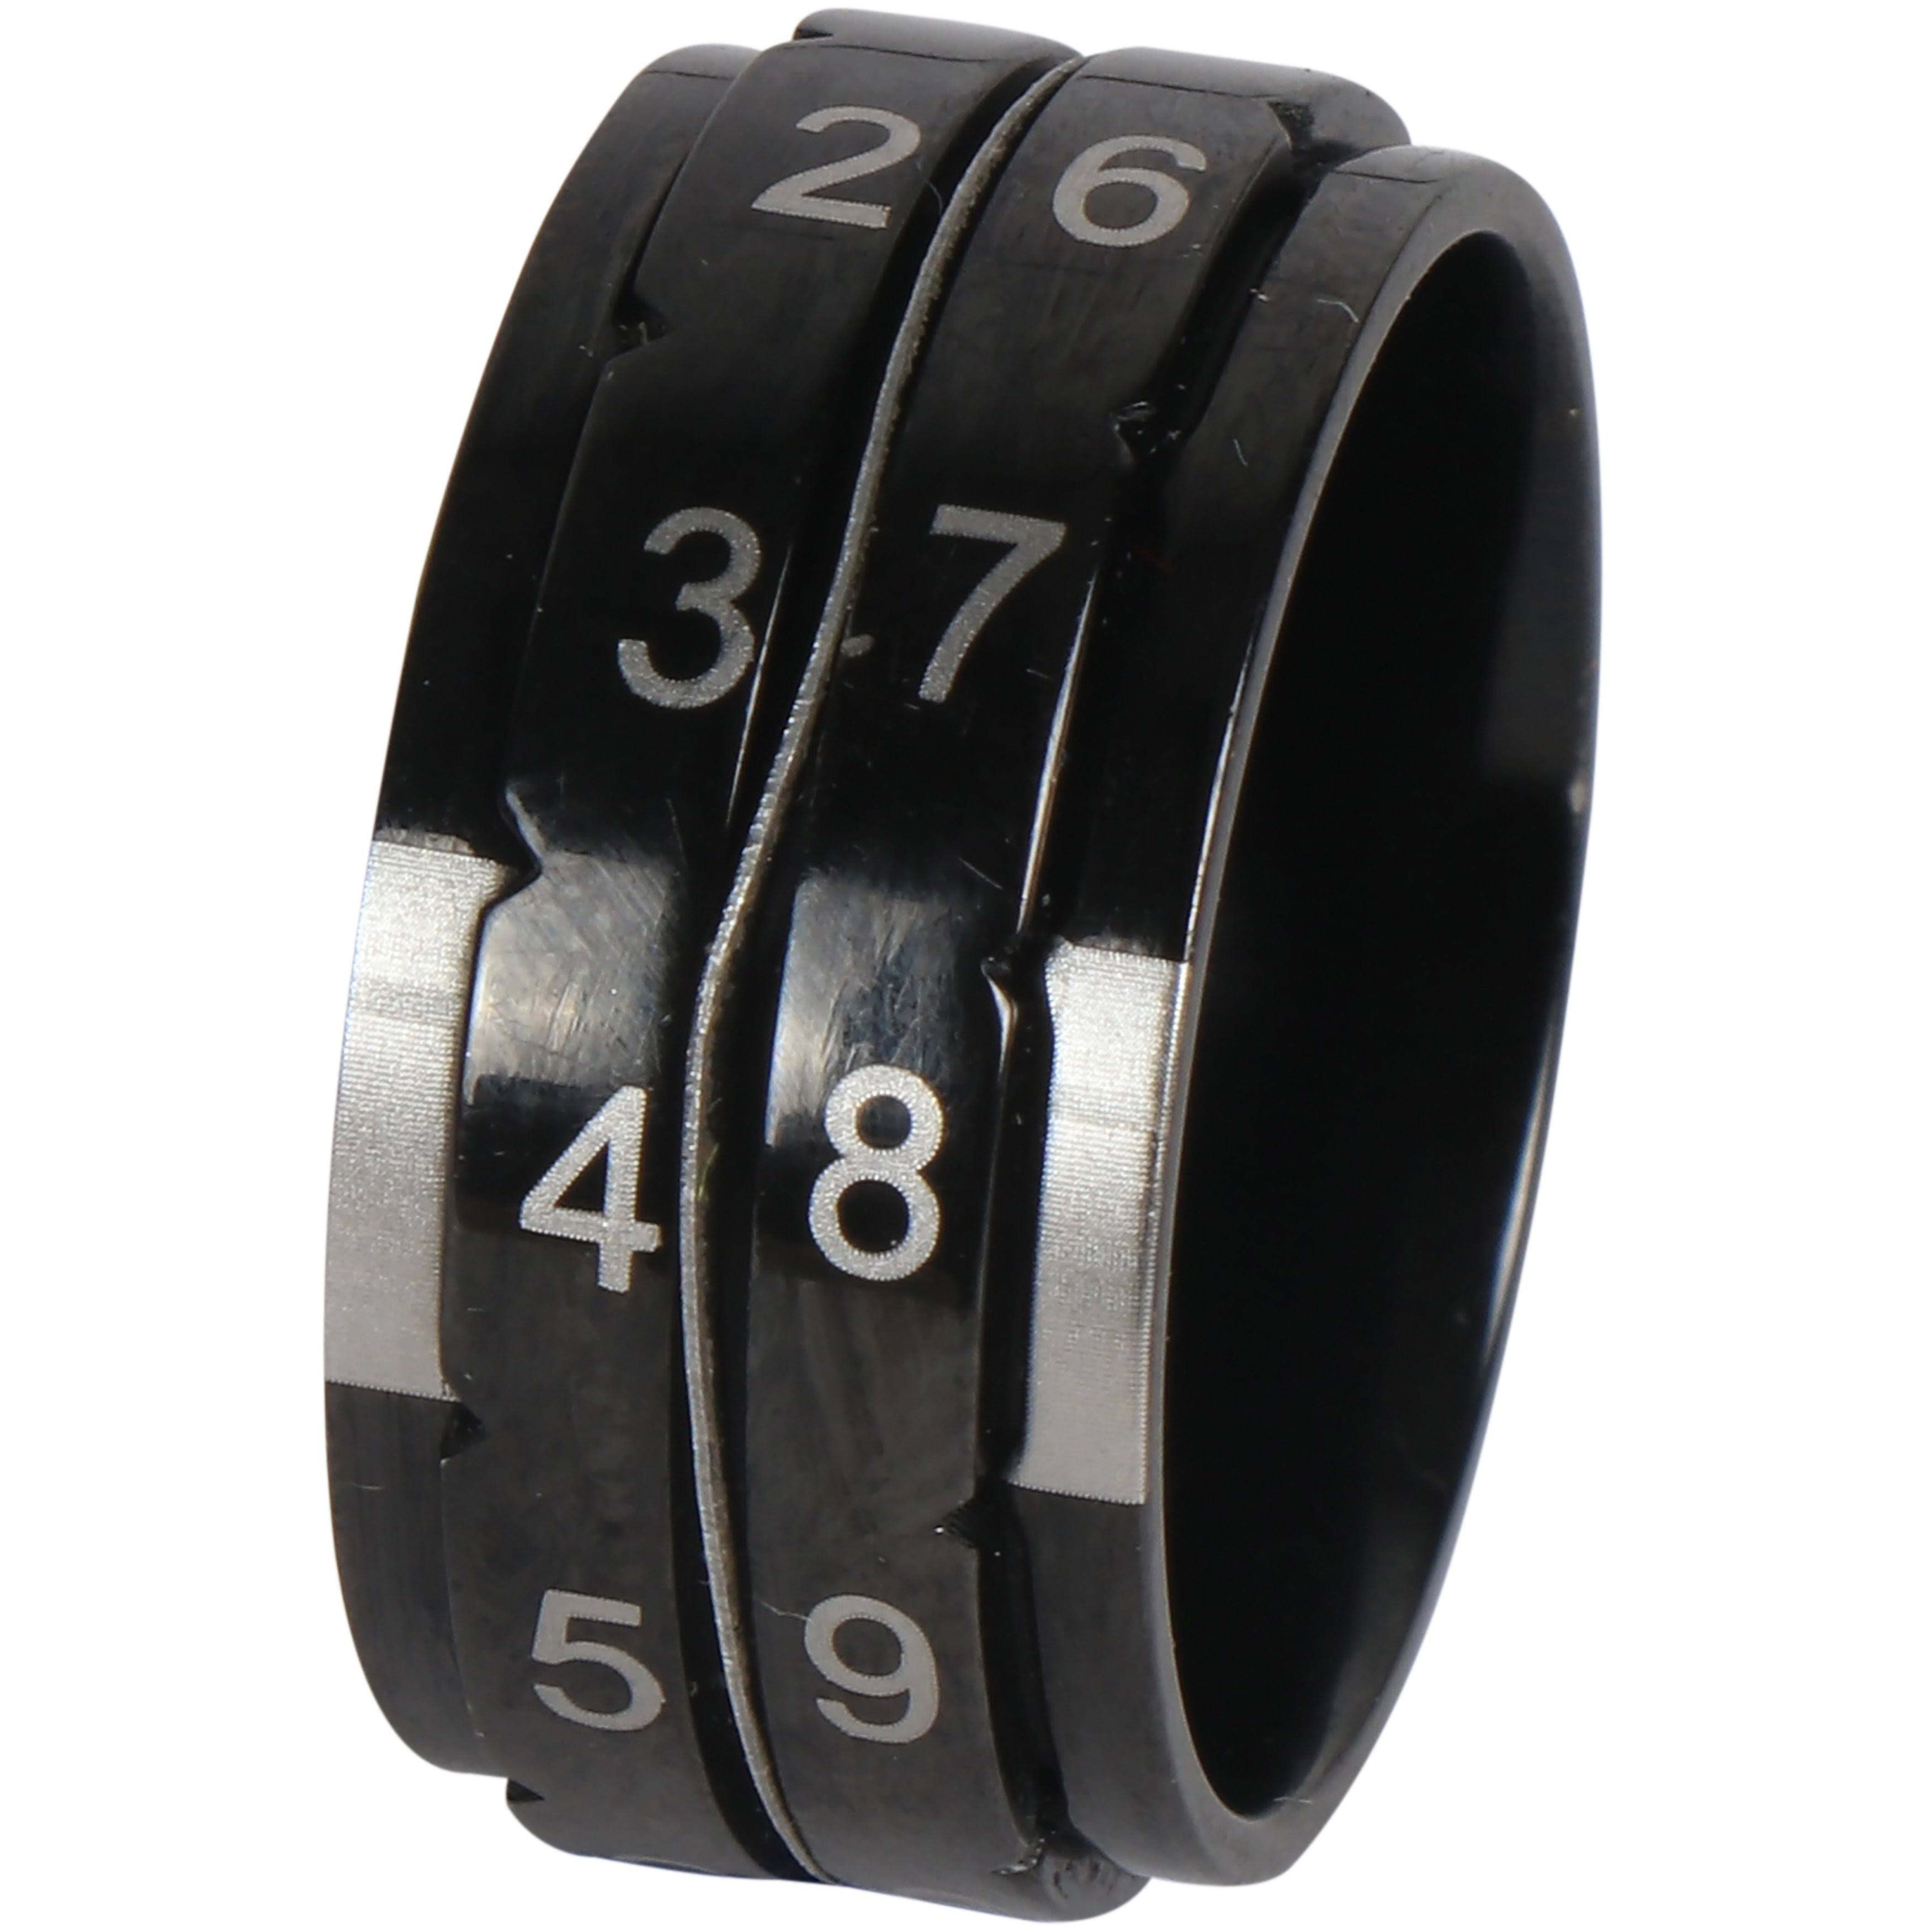 Knitter's Pride Row Counter Ring-size 10: 19.8mm Diameter -kp800408